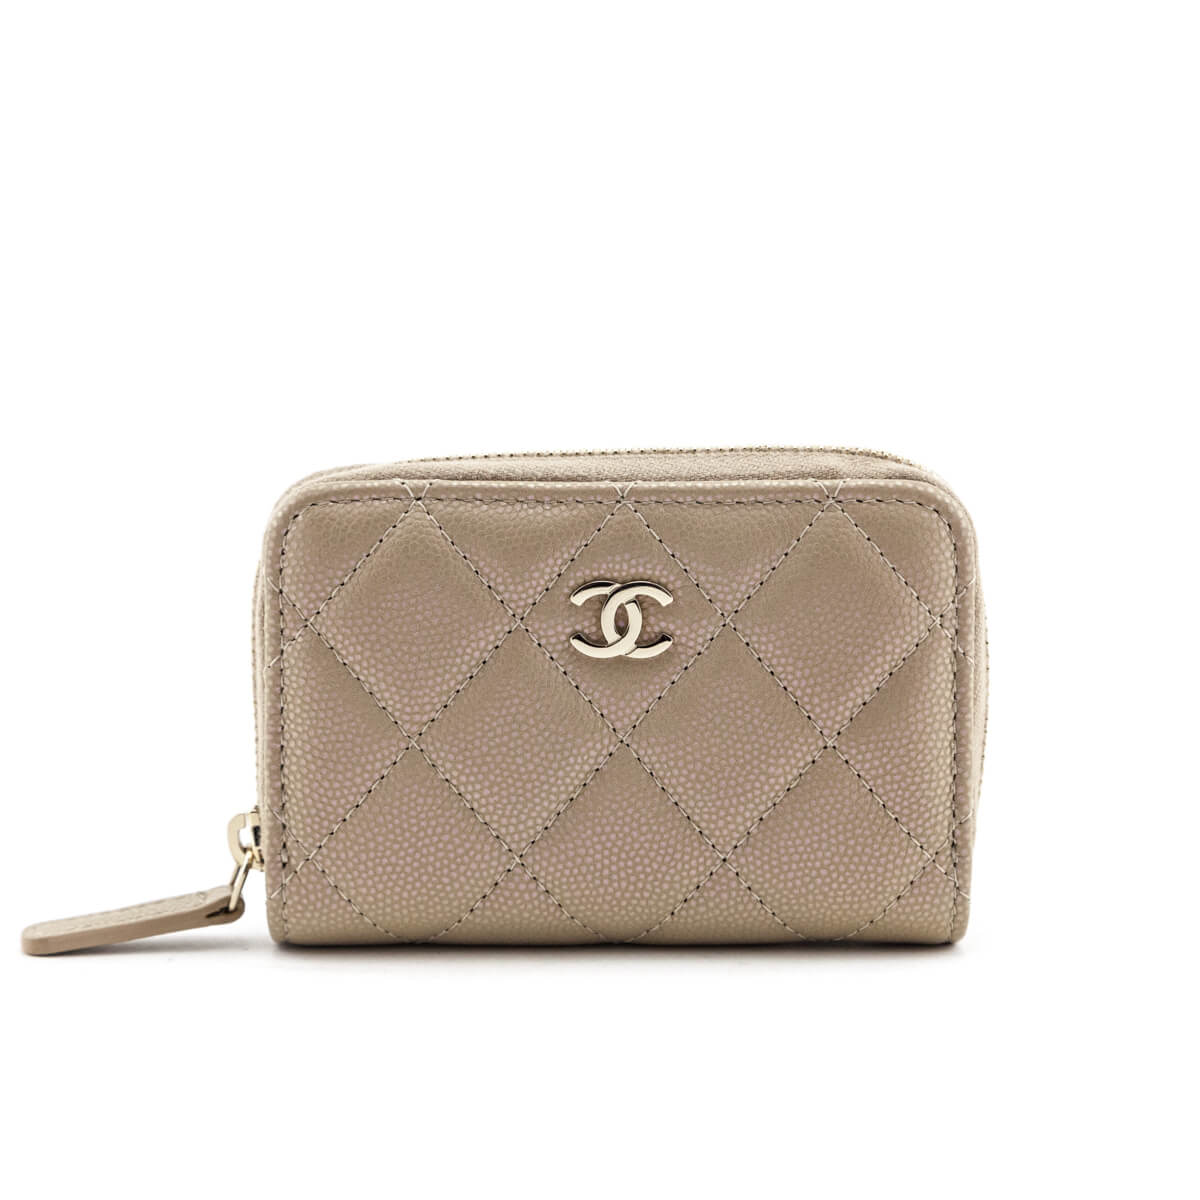 Chanel Metallic Iridescent Beige Quilted Caviar Classic Zipped Coin Purse - Love that Bag etc - Preowned Authentic Designer Handbags & Preloved Fashions